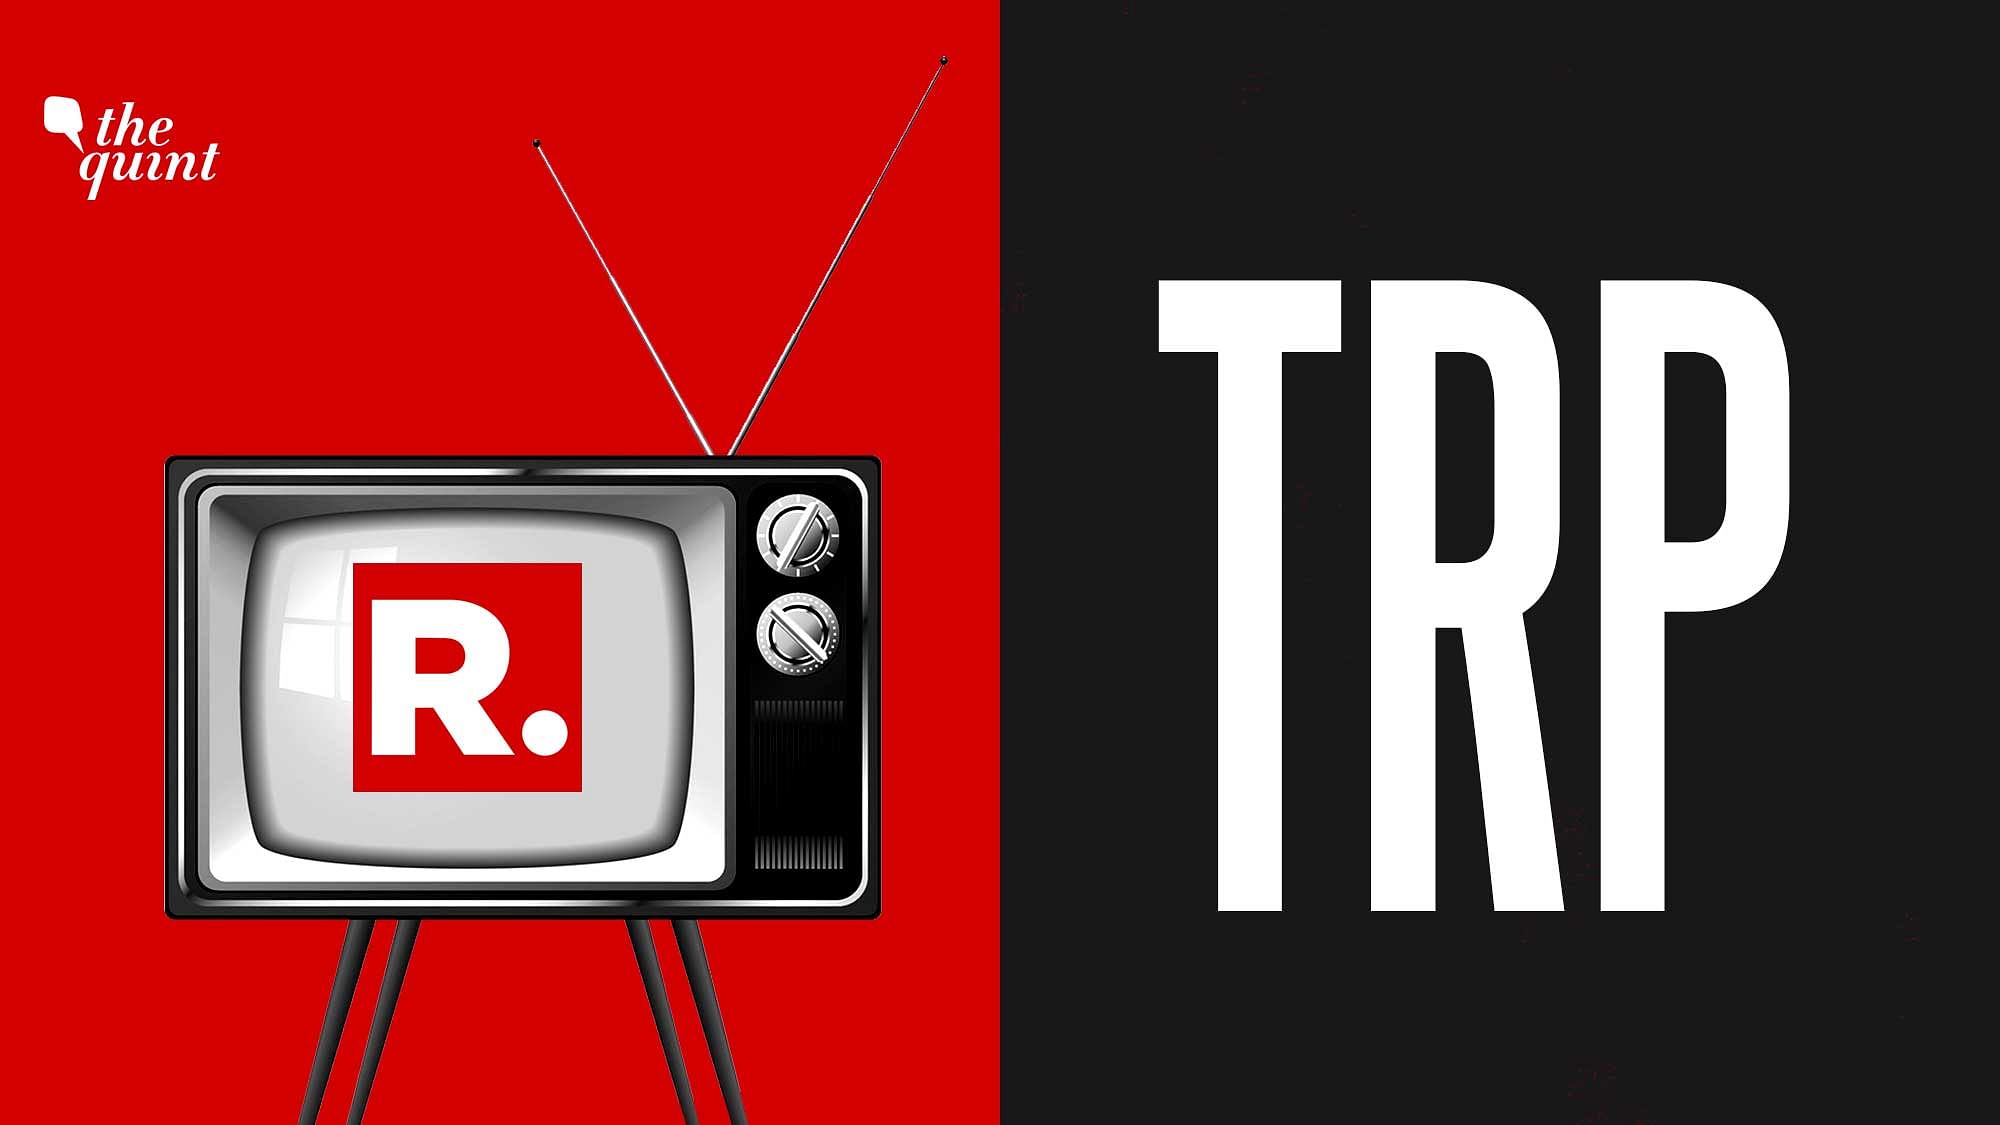 The Mumbai Police crime branch has summoned the Chief Financial Officer (CFO) of Republic TV, S Sundaram, in connection with the <a href="https://www.thequint.com/news/india/mumbai-police-busts-trp-scam-names-republic-tv">rigged TRPs case</a>. 